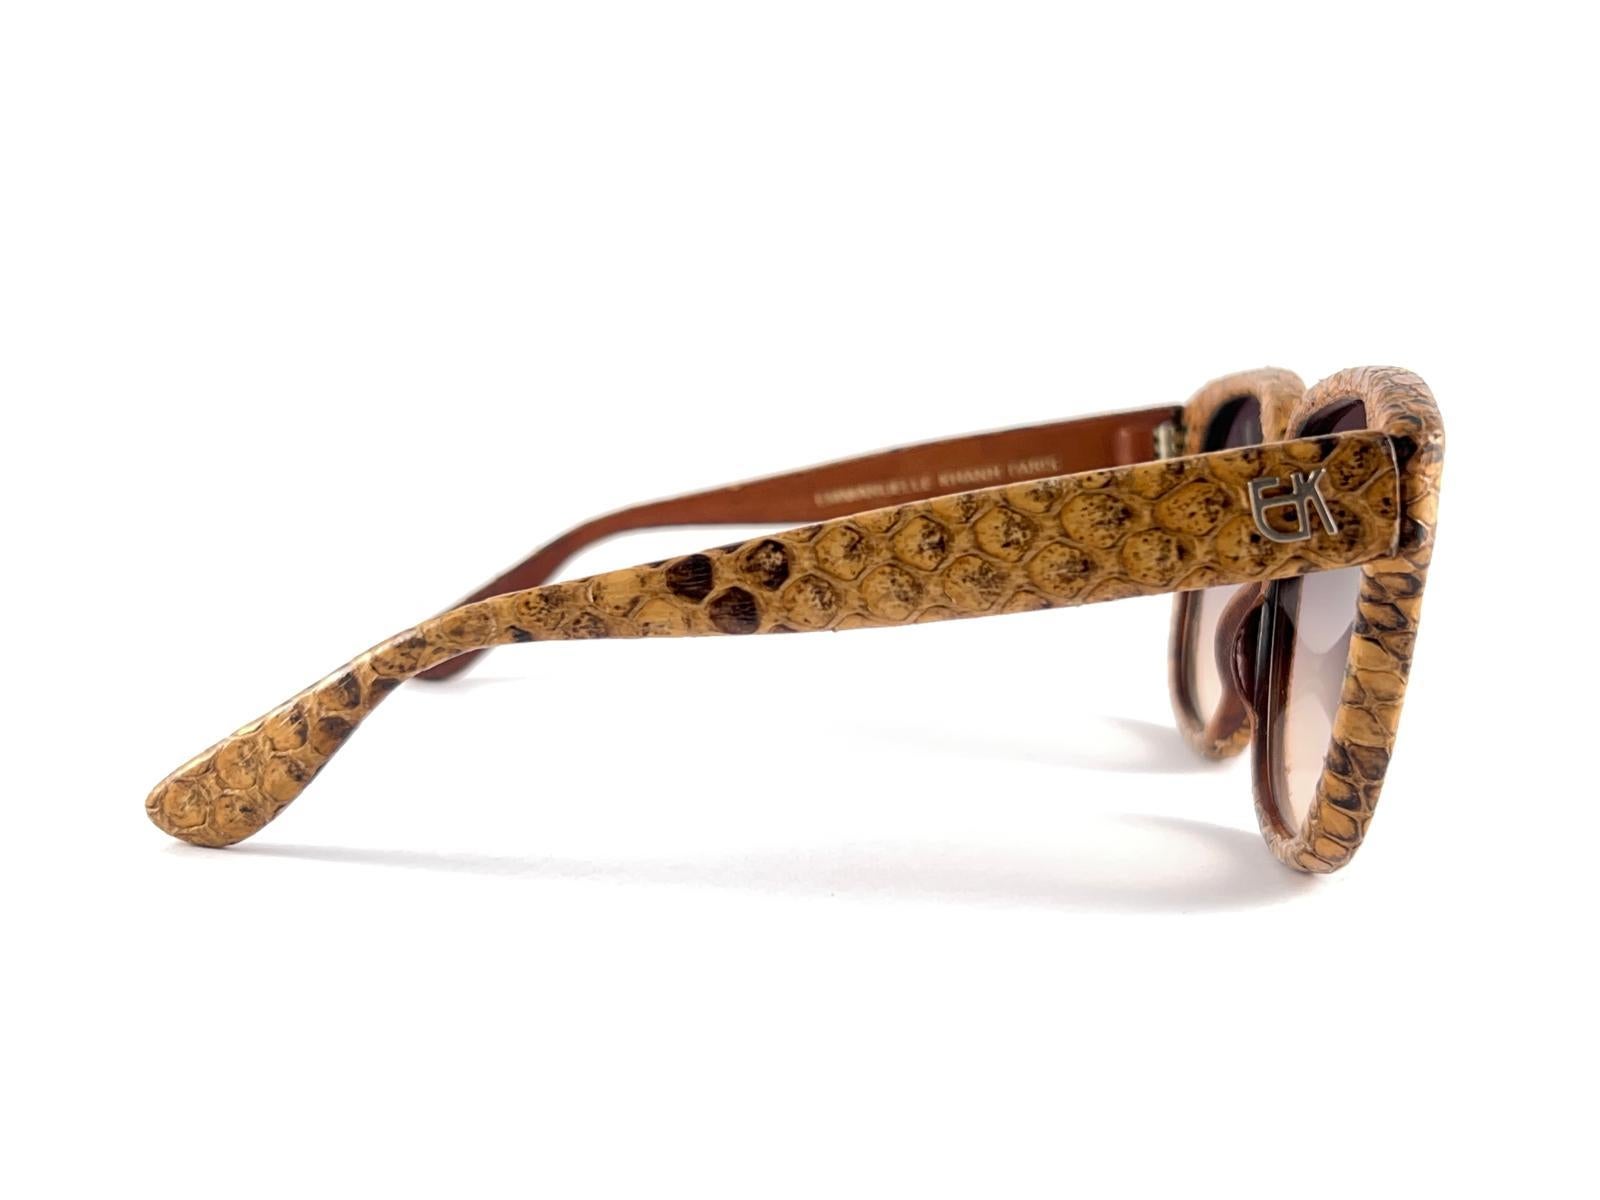 New Vintage Emmanuelle Khanh Pyton Veritable 1970'S France Sunglasses In New Condition For Sale In Baleares, Baleares